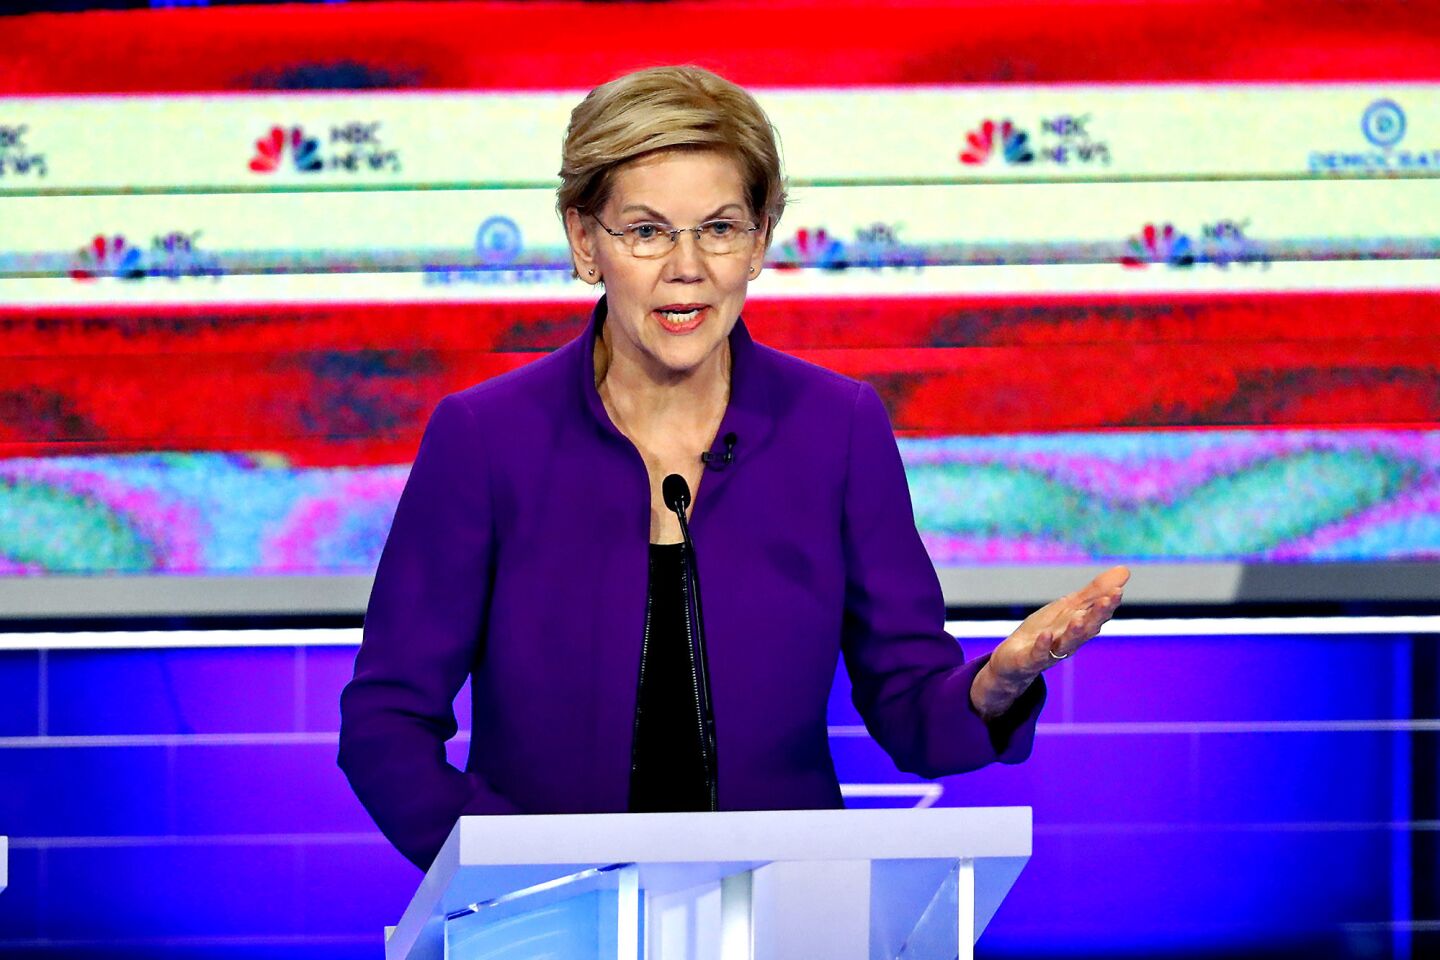 Sen. Elizabeth Warren (D-Mass.) set the tone in the early part of the debate. She spoke of specific policy proposals, such as breaking up big tech corporations and raising taxes on the wealthy.